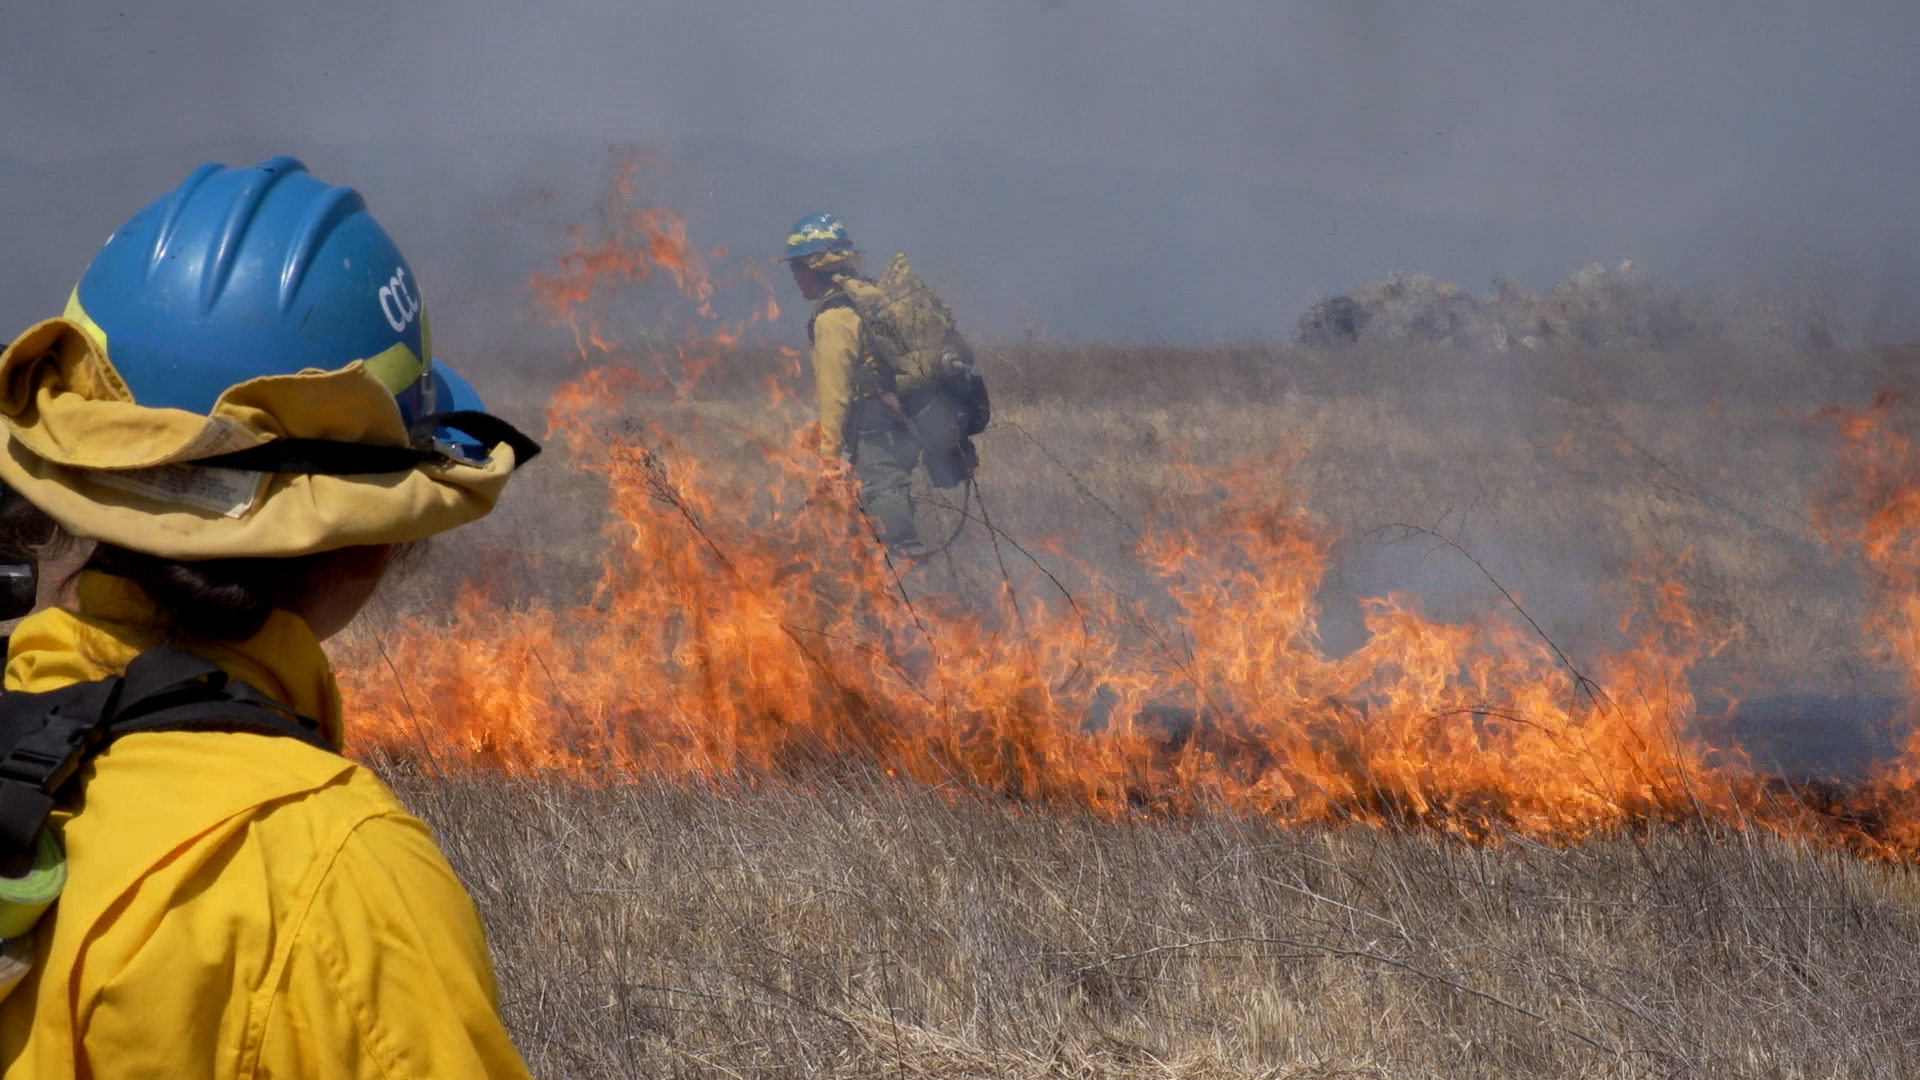 female in fire gear in foreground watches flames flicker in background